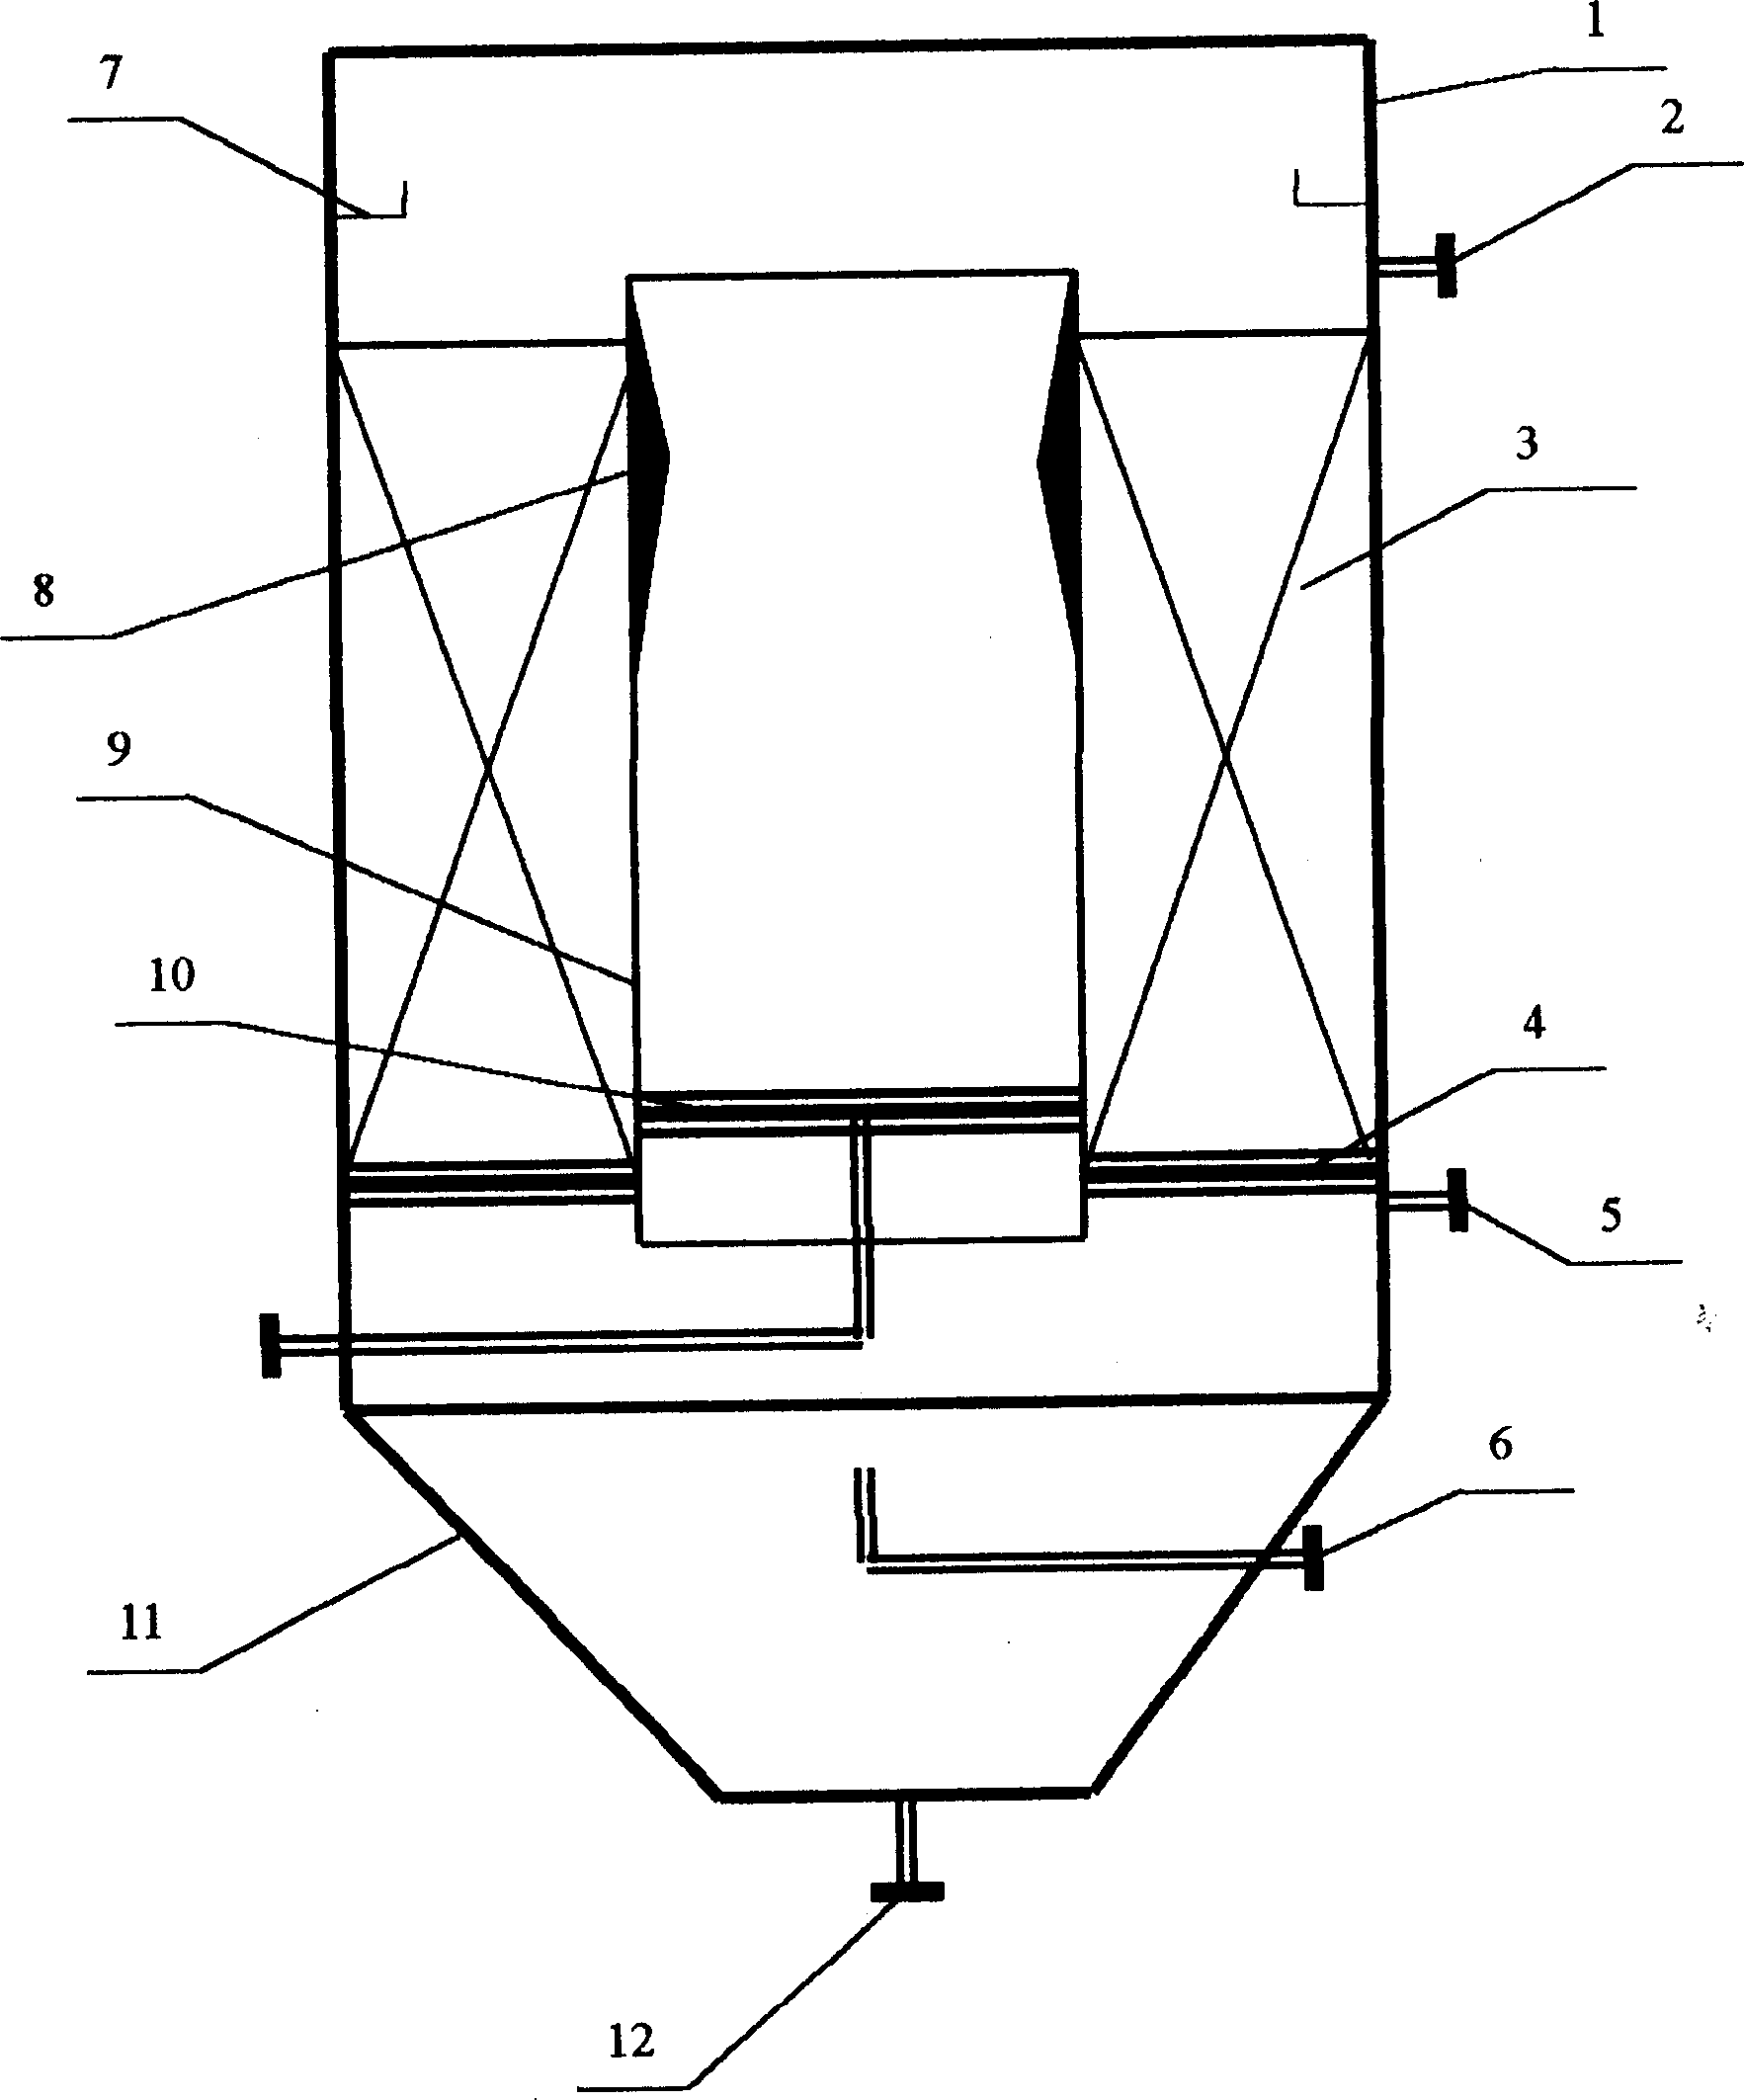 Improved internal electrolytic iron bed apparatus for treating water